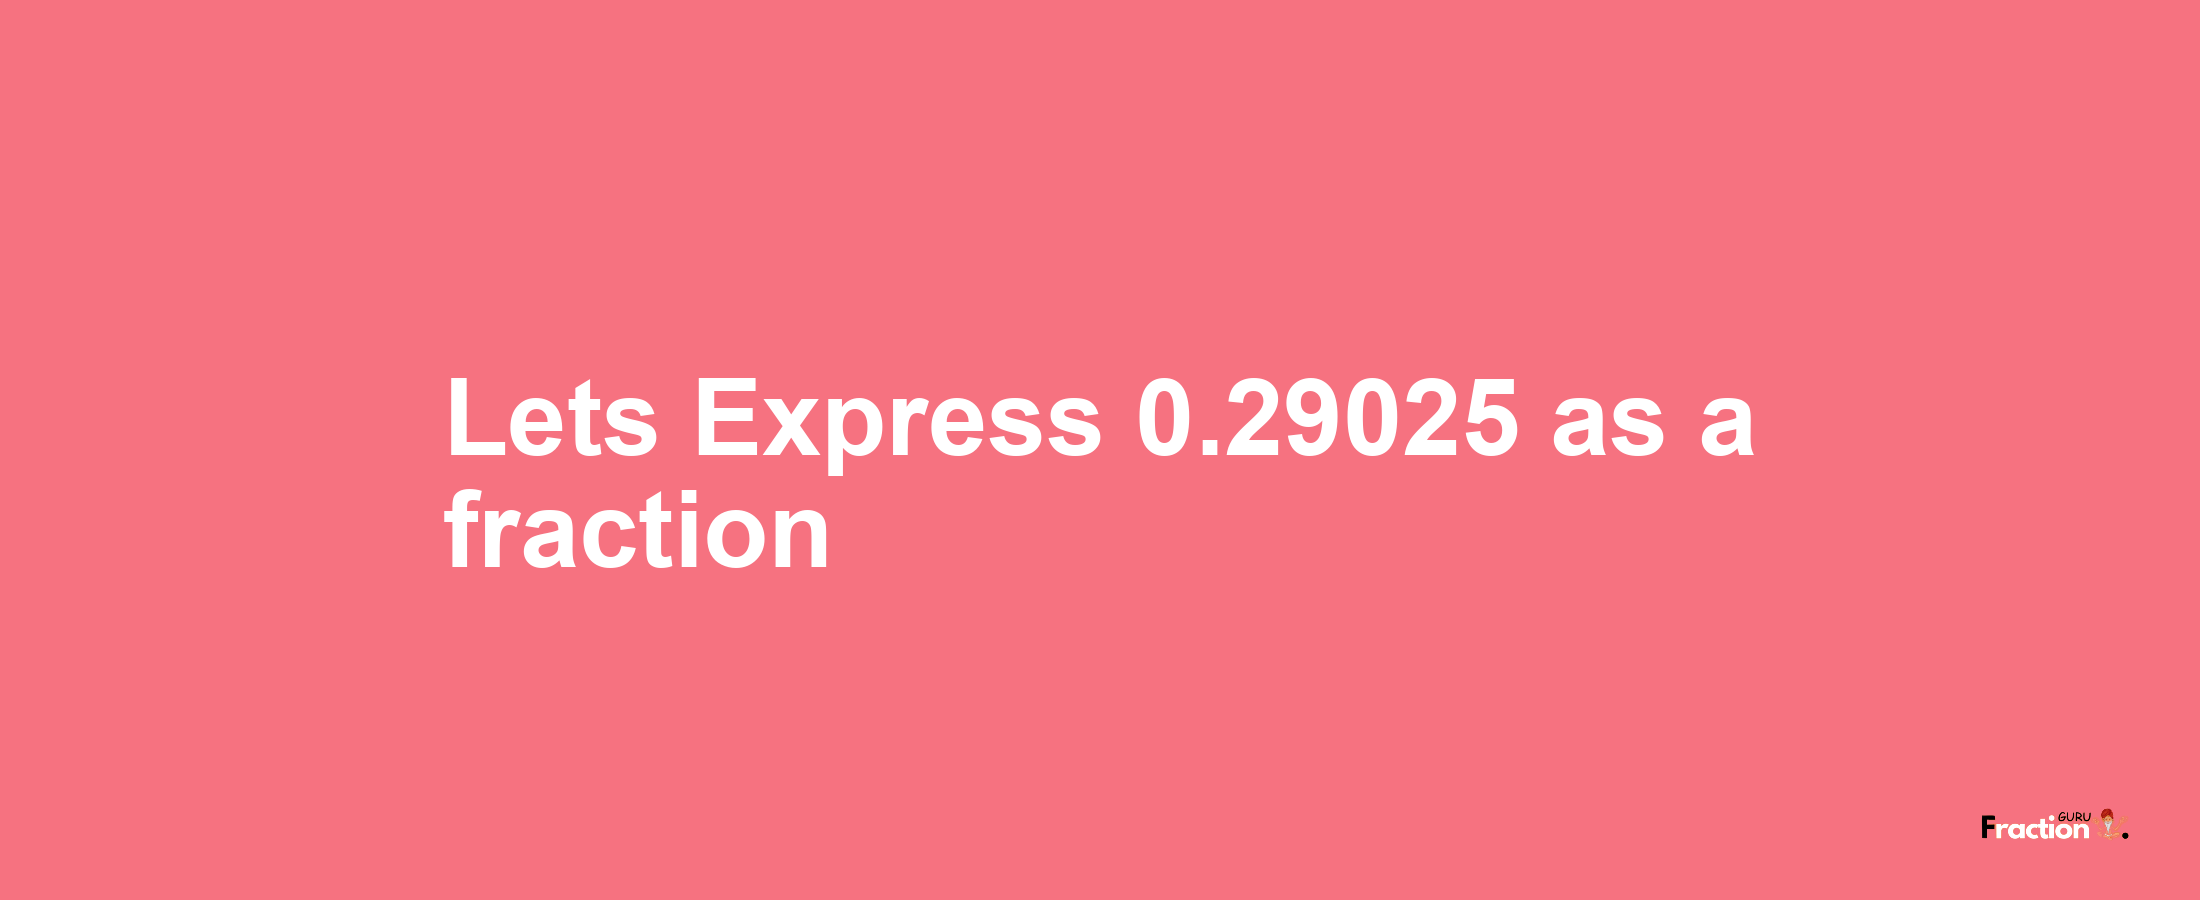 Lets Express 0.29025 as afraction